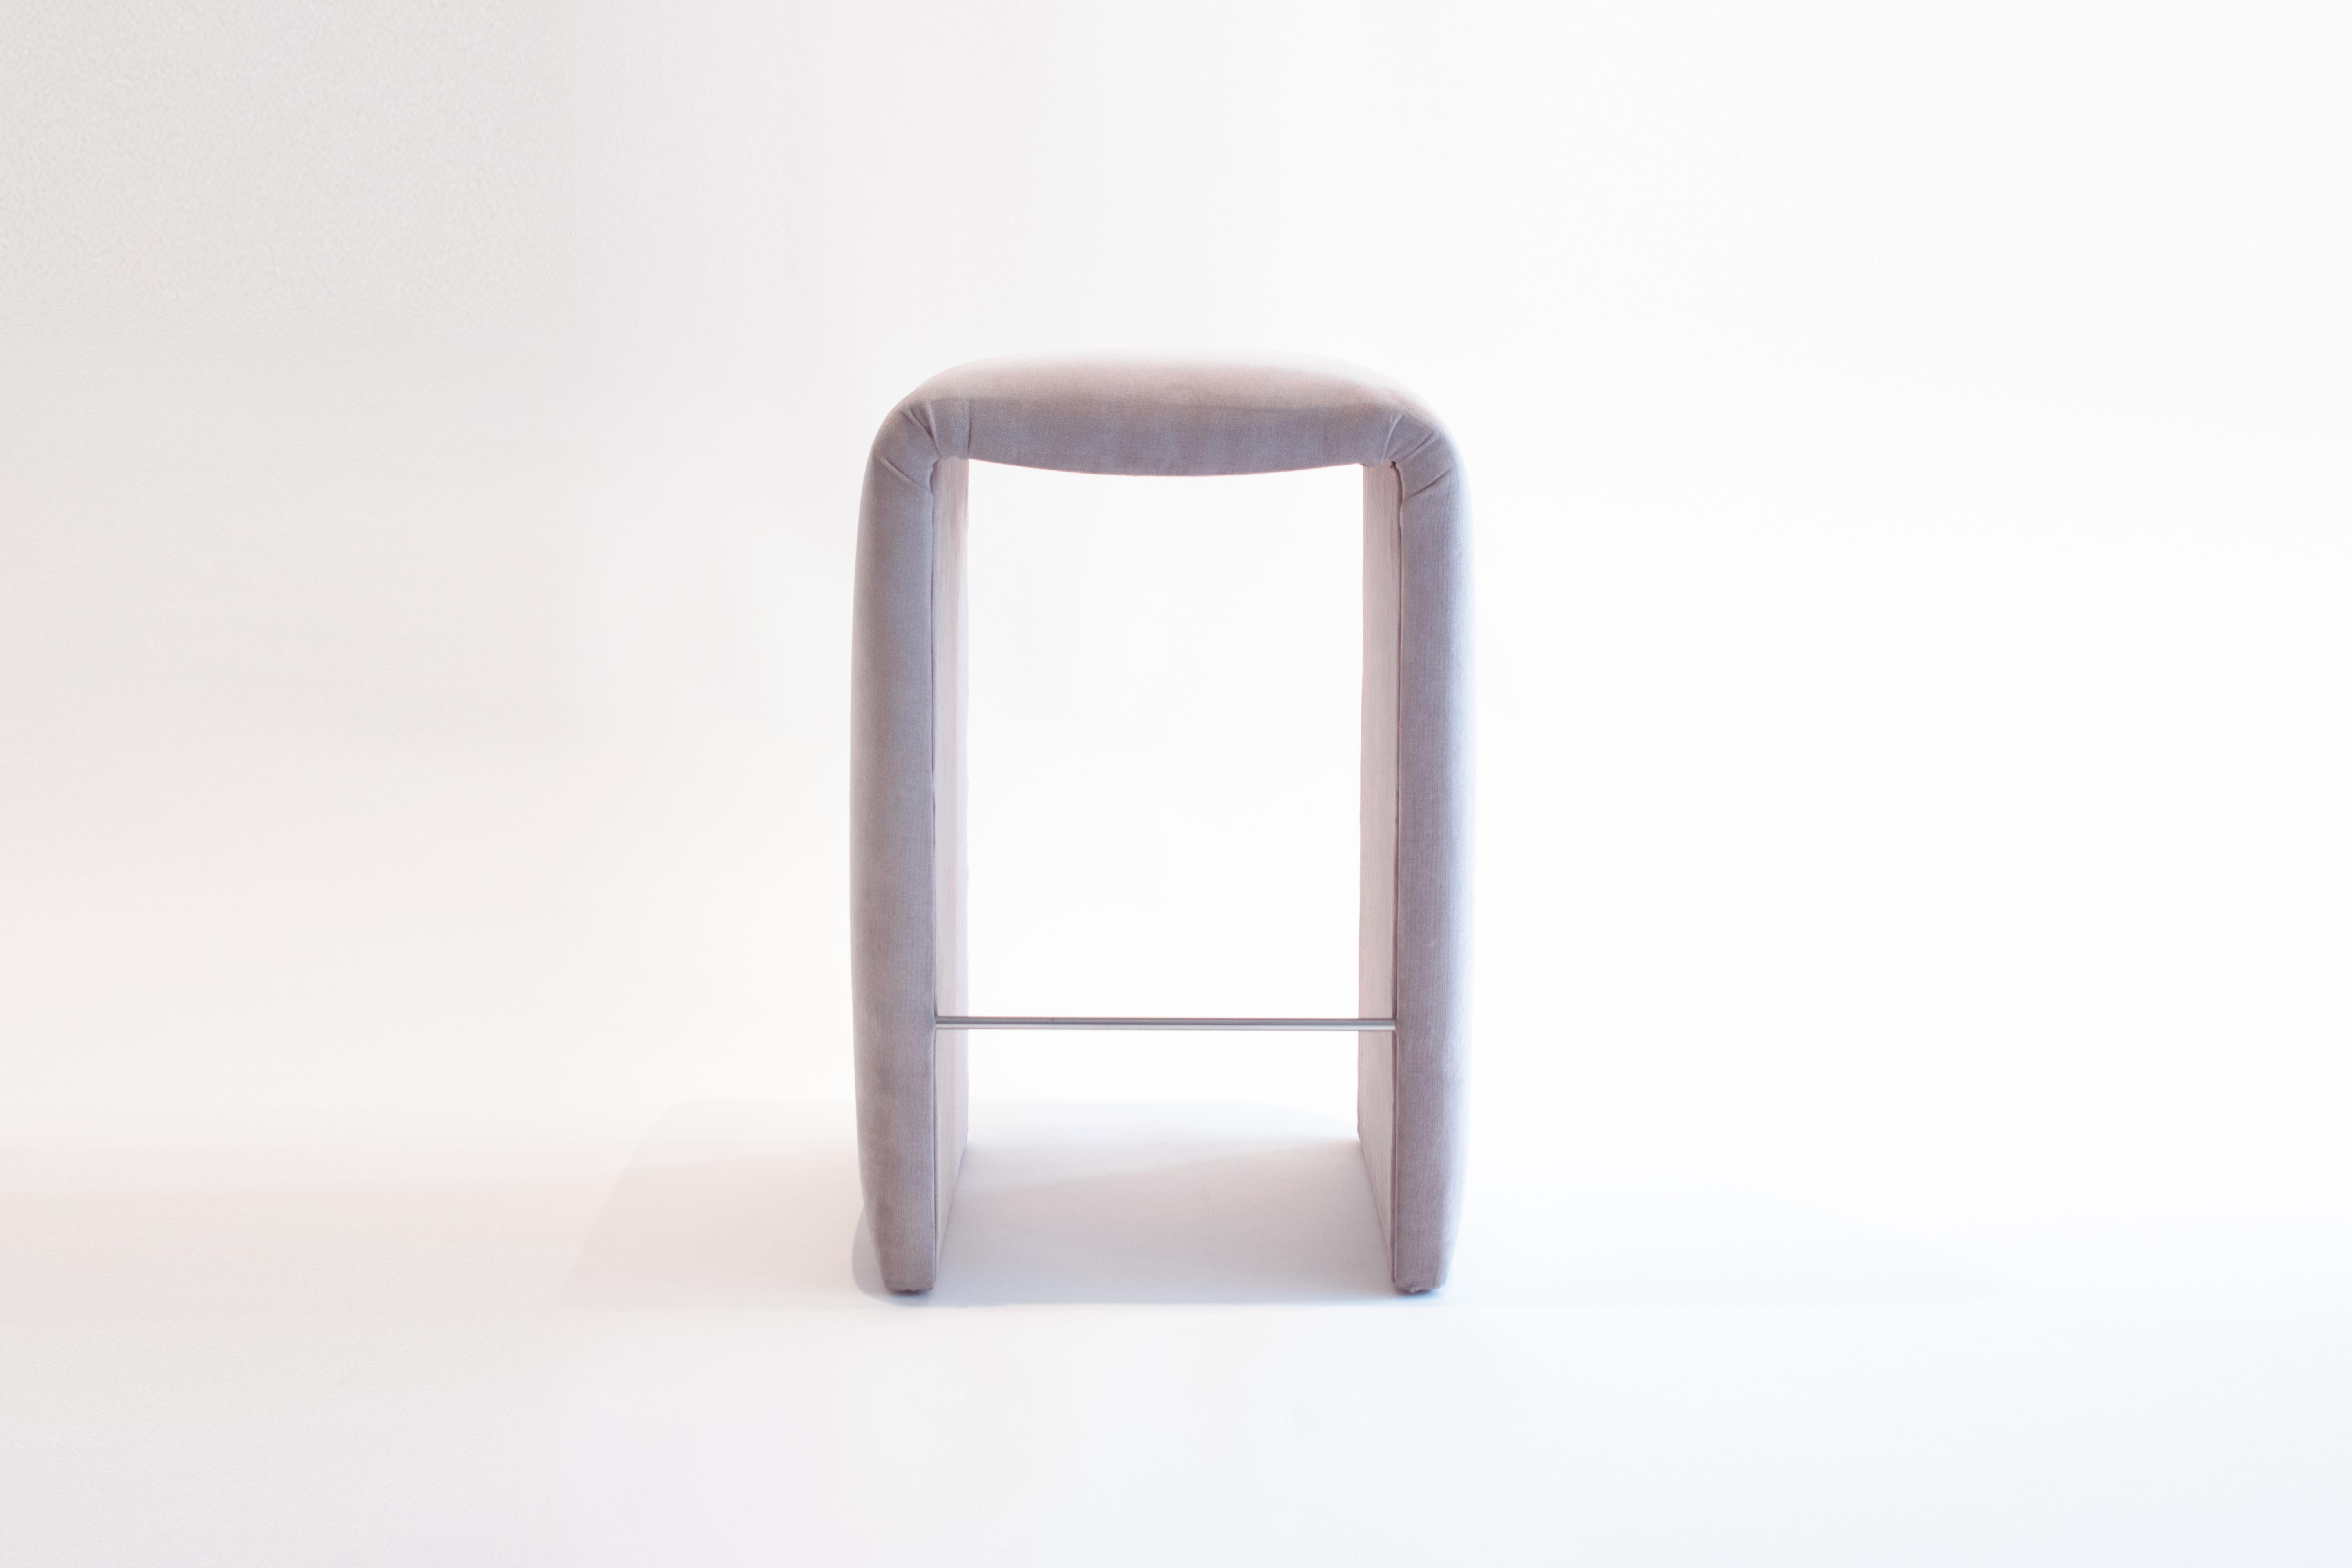 This seat piece follows the pulpiness found in the materiality of the series by introducing a continuous gently curved volume. Used as a high stool, the profile is softly recessed in the middle to form an ergonomic seating surface. Comfortable but